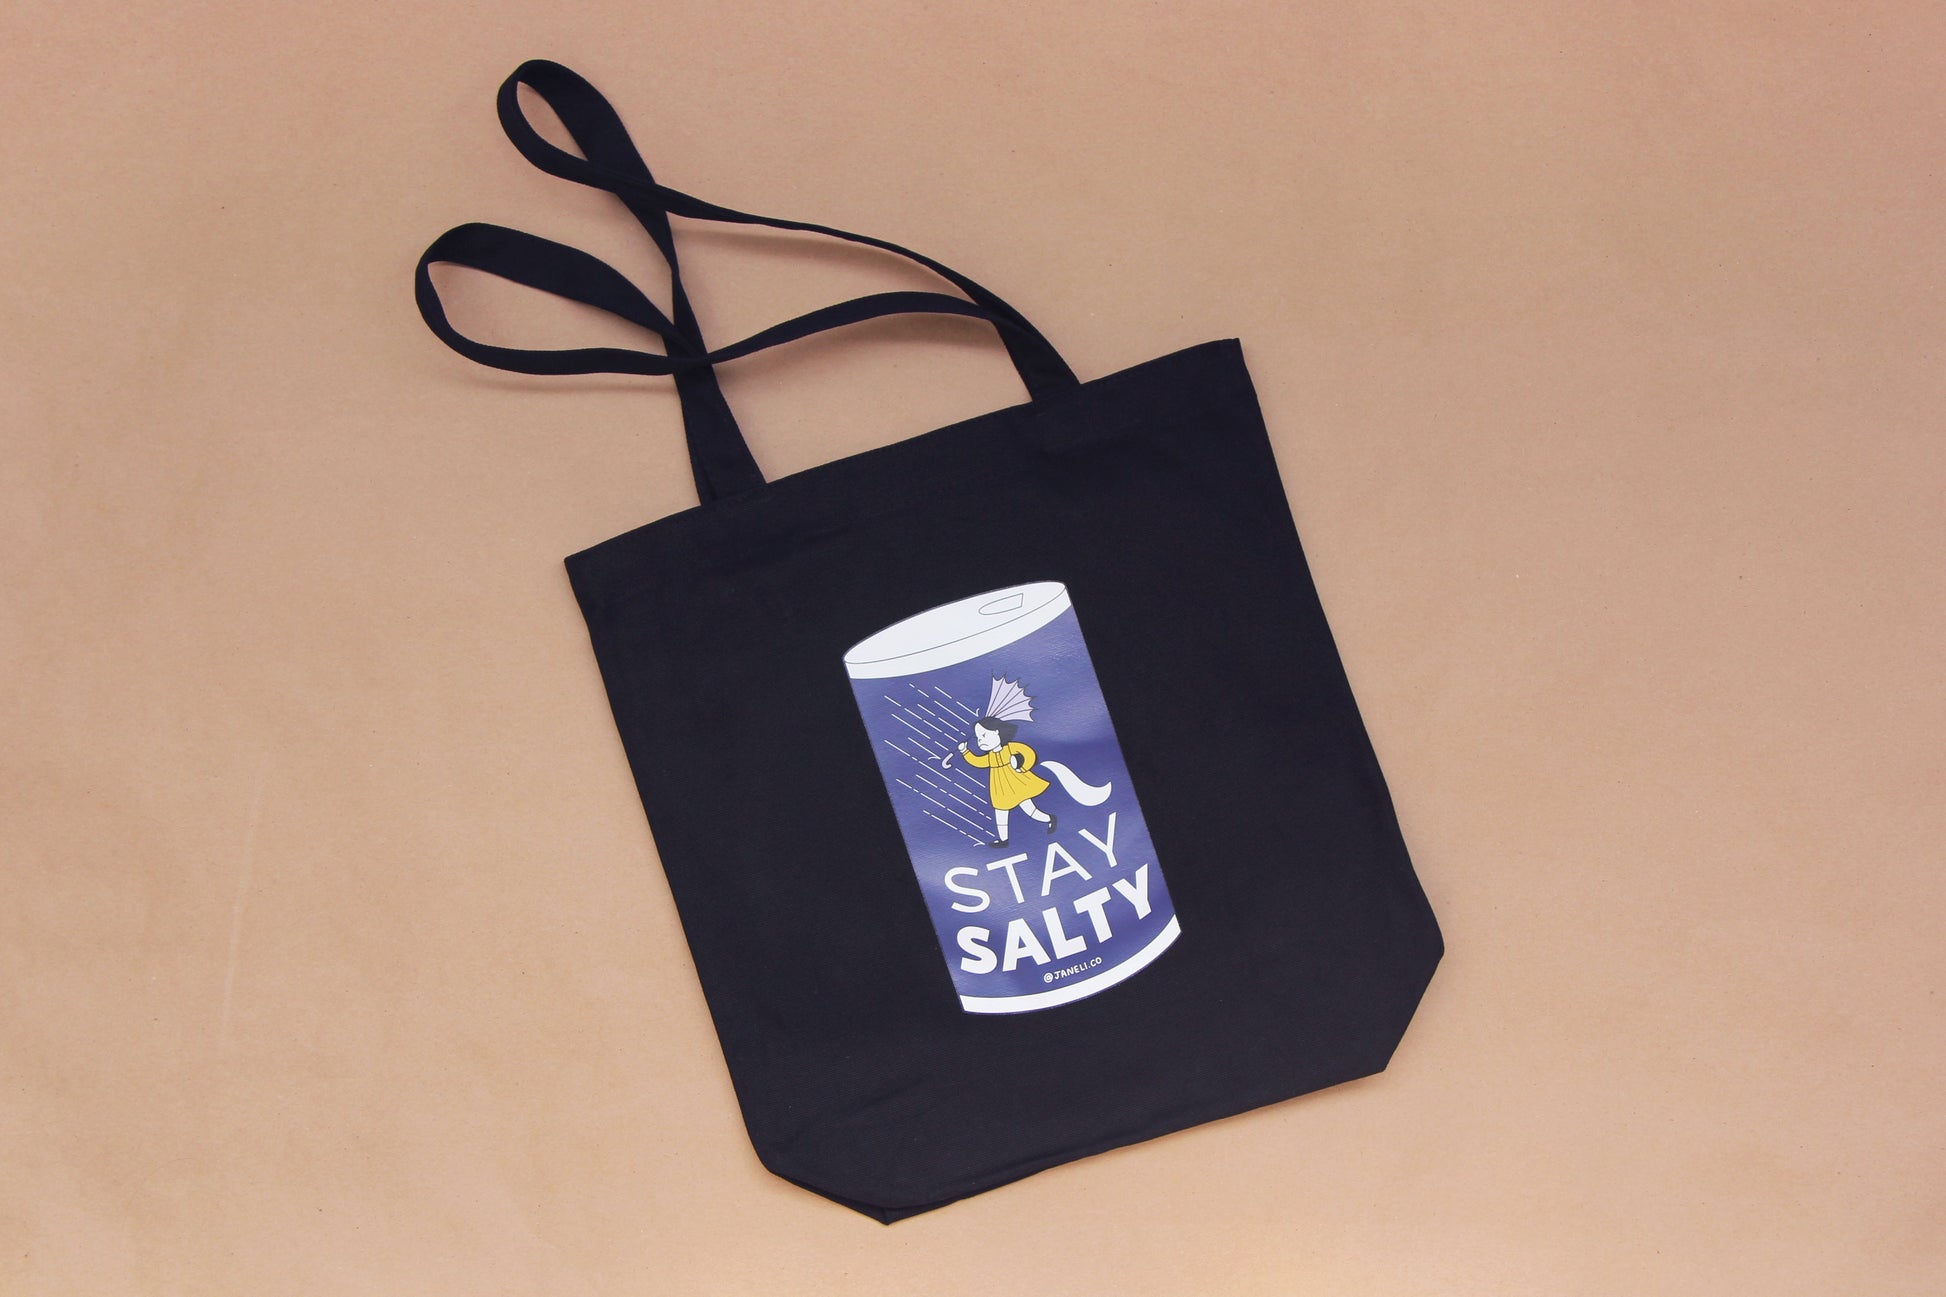 A photo of a black tote with a grumpy salt girl that says "Stay Salty" on it over a tan background.